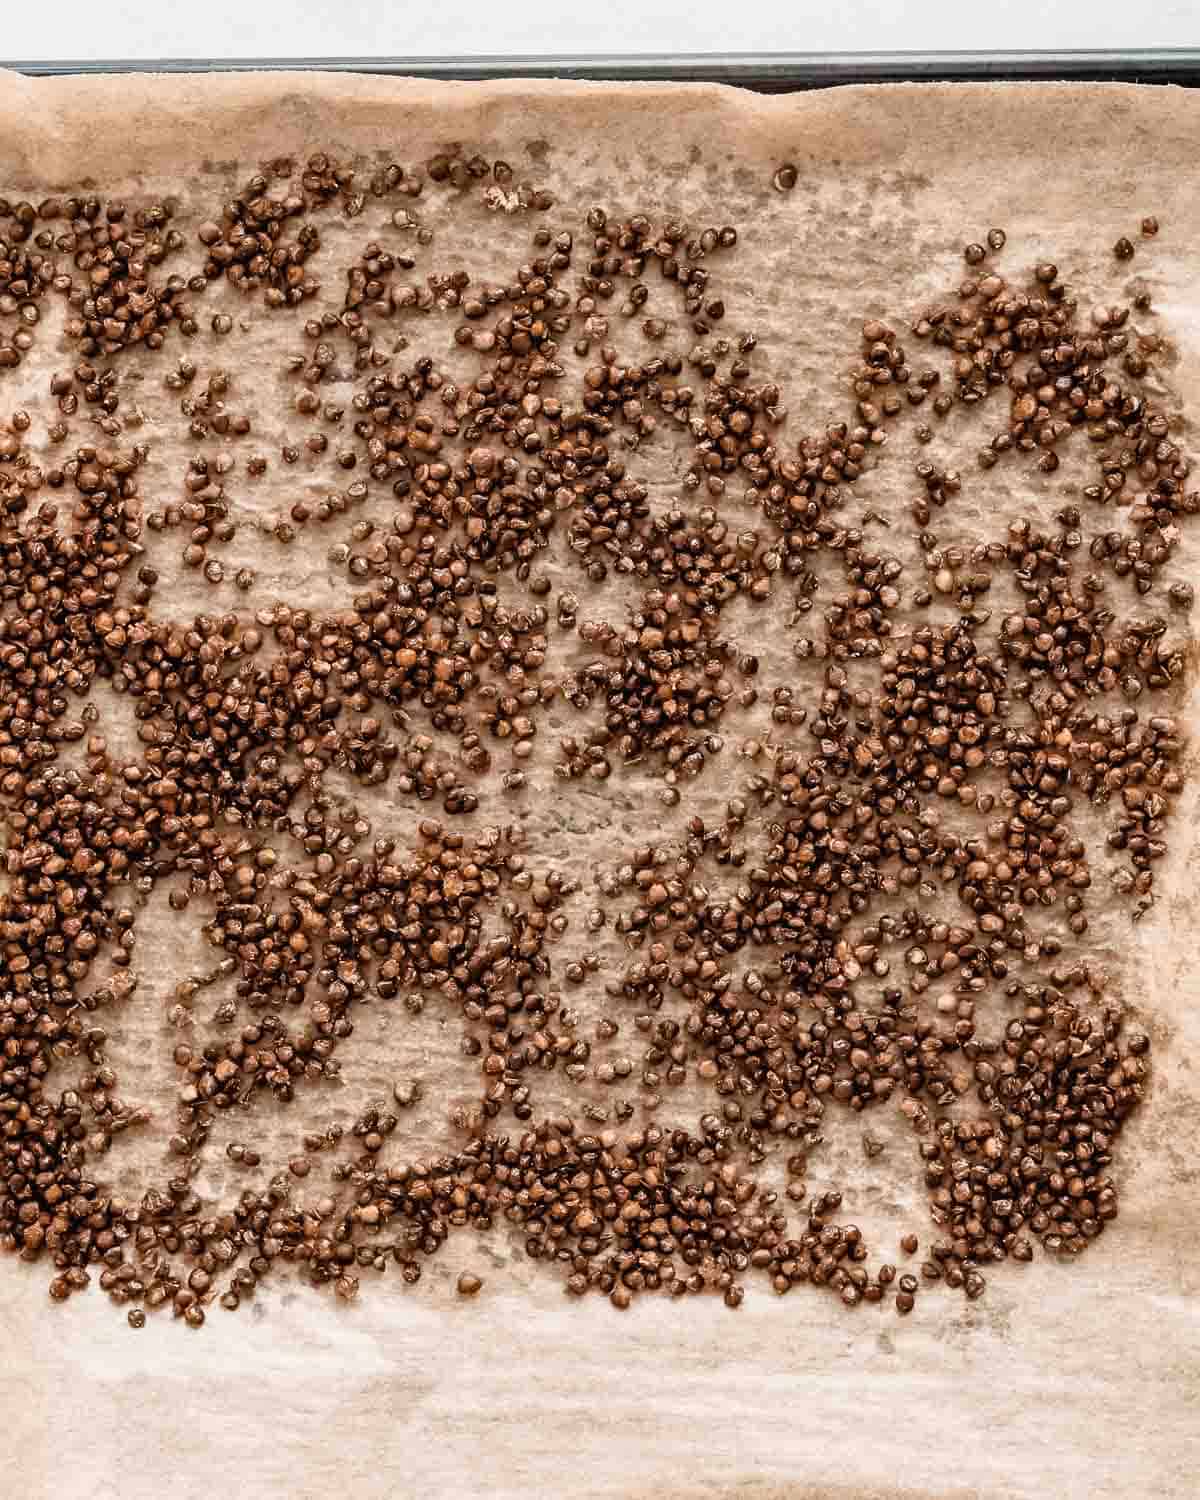 roasted lentils spread out on a baking tray lined with parchment paper.